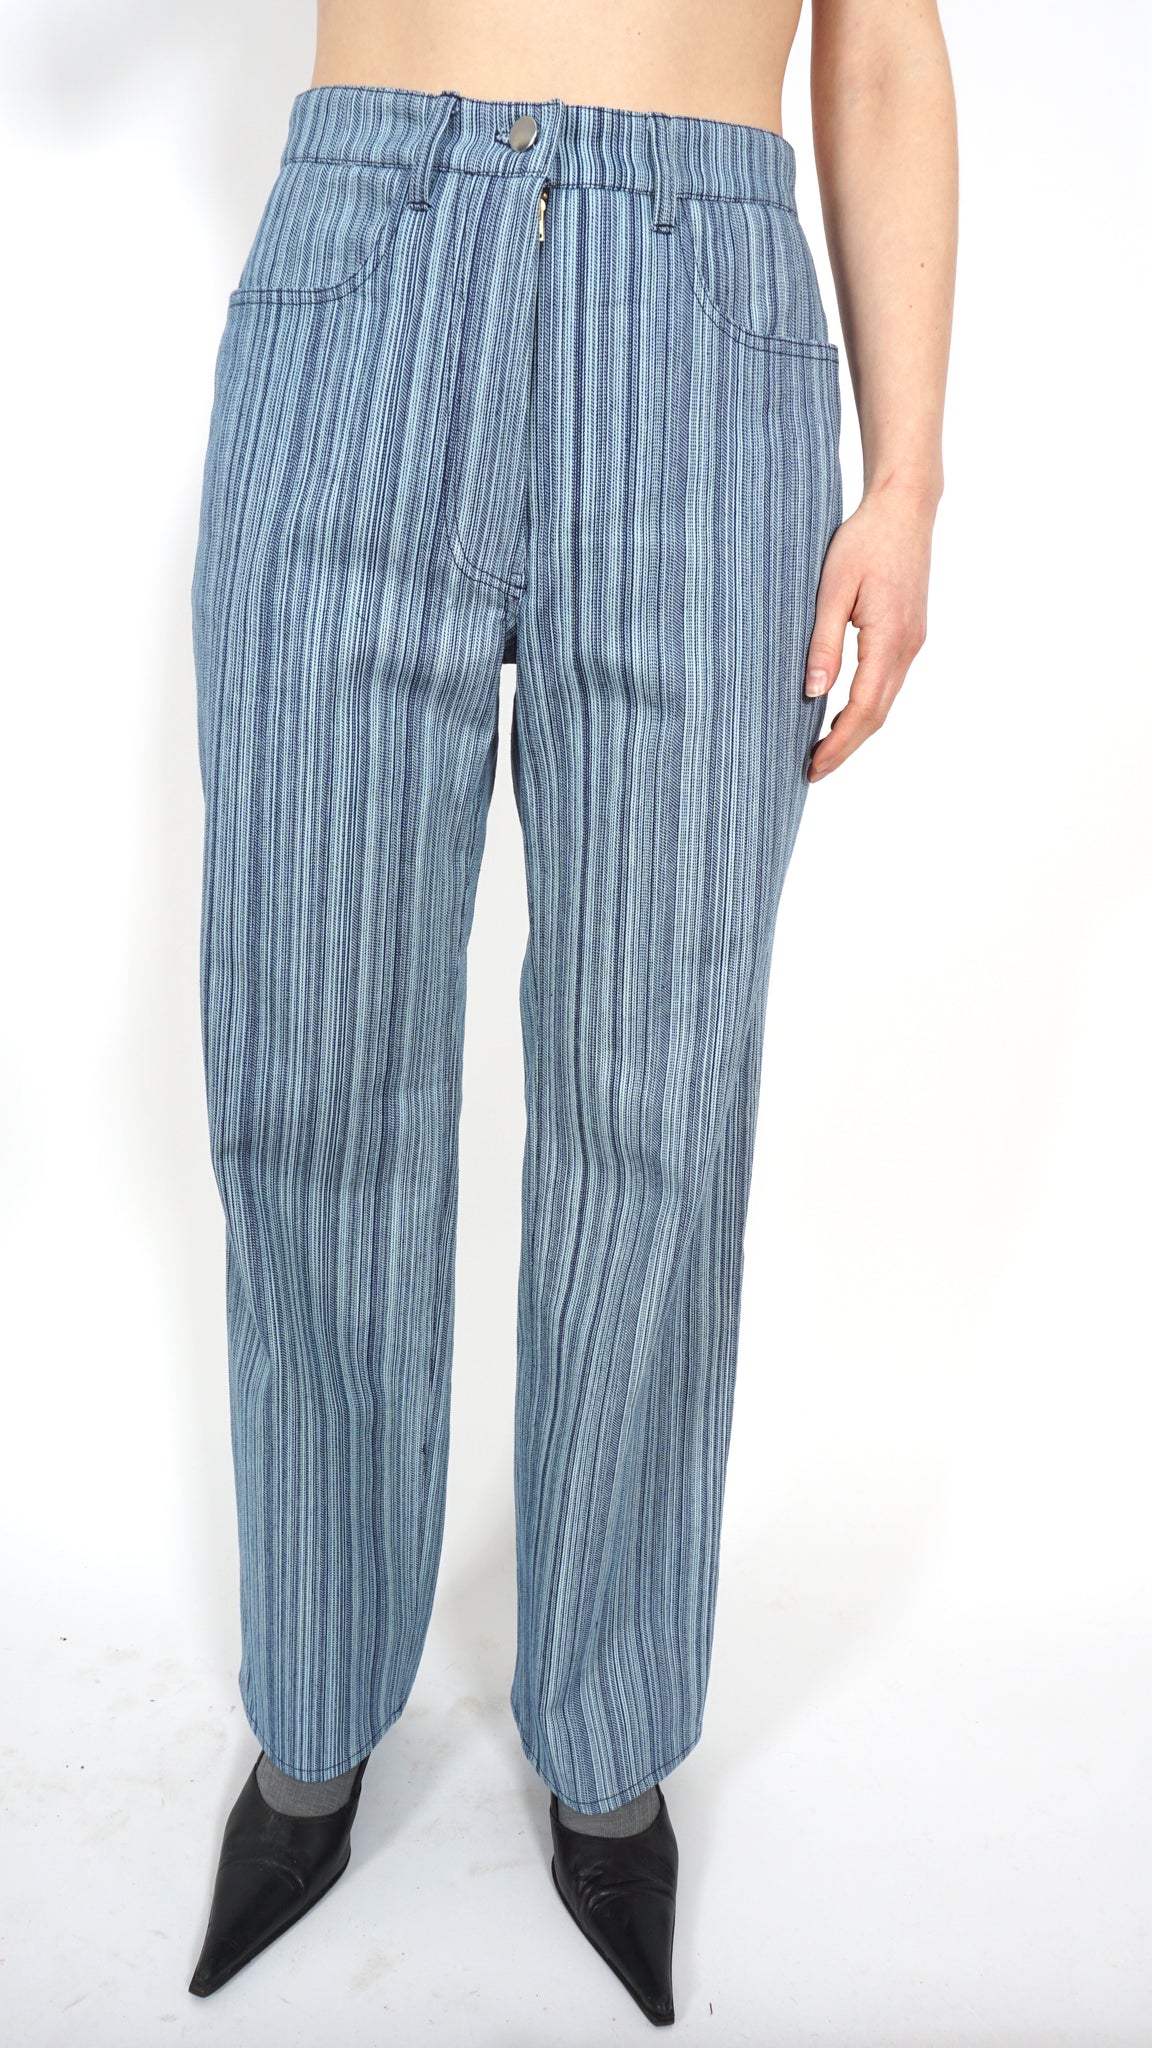 Striped pants by Maria Holm